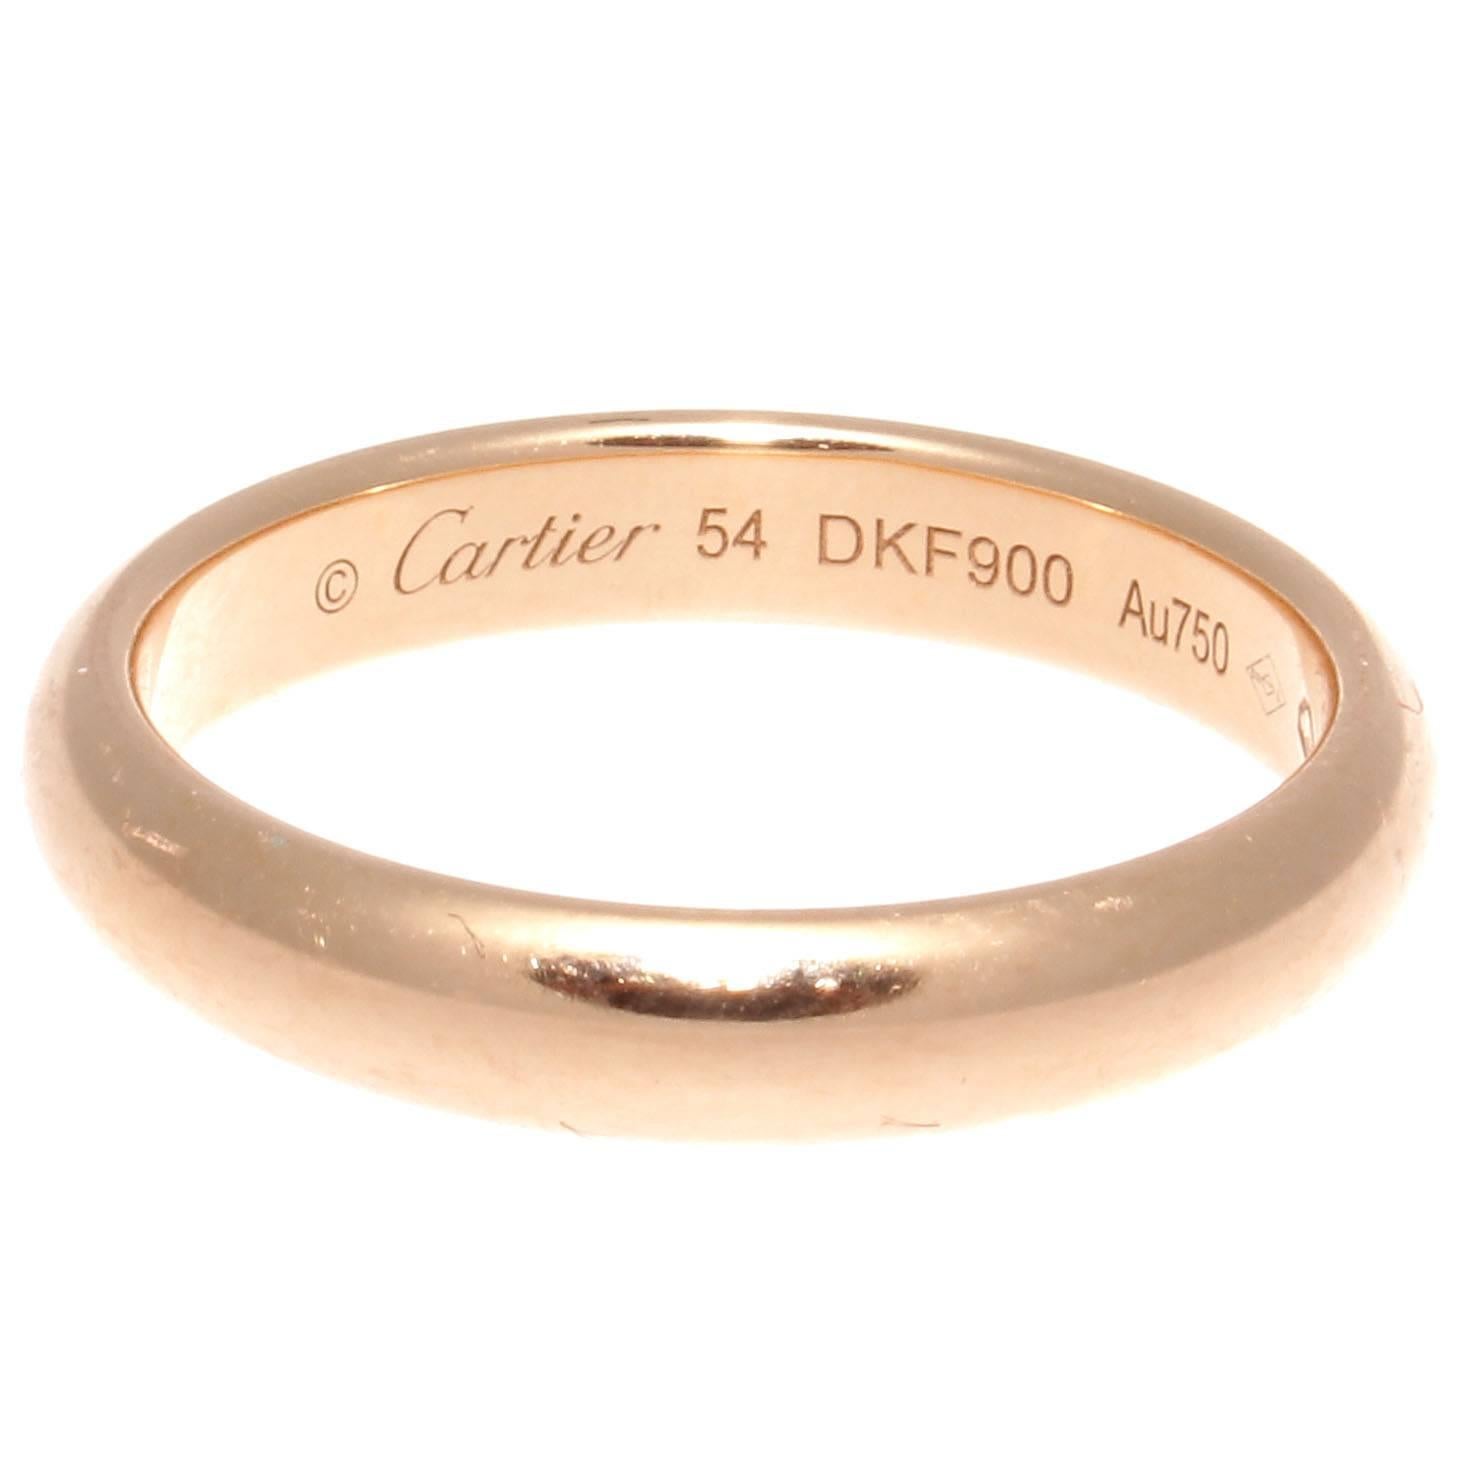 The Cartier gold band is in 18k gold, signed Cartier, serial number DKF900 and French size 54 which is U.S. 7. 